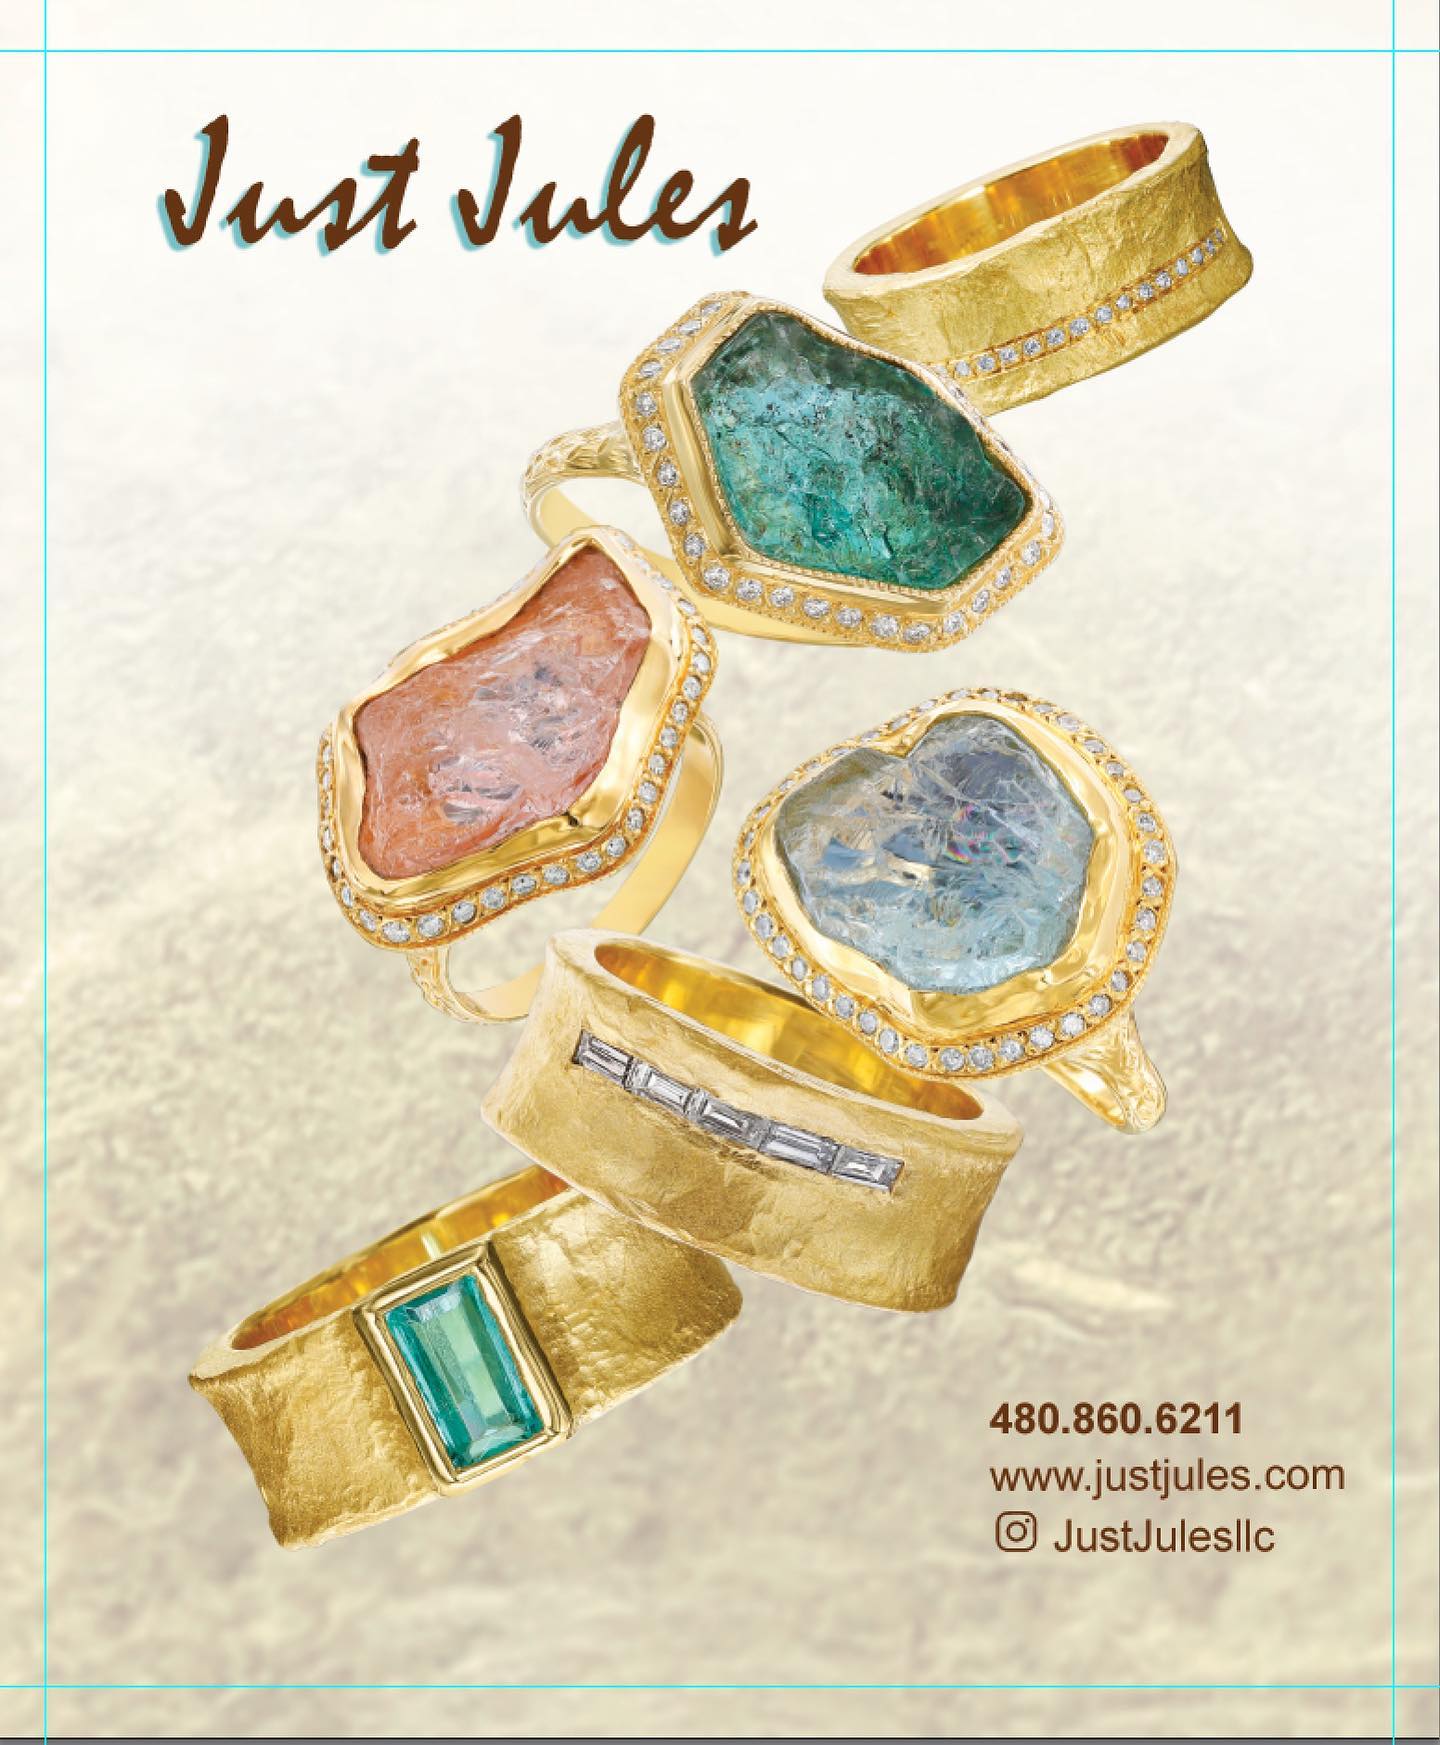 Julie's Jewels & Gifts Inc., Jewelry store near me